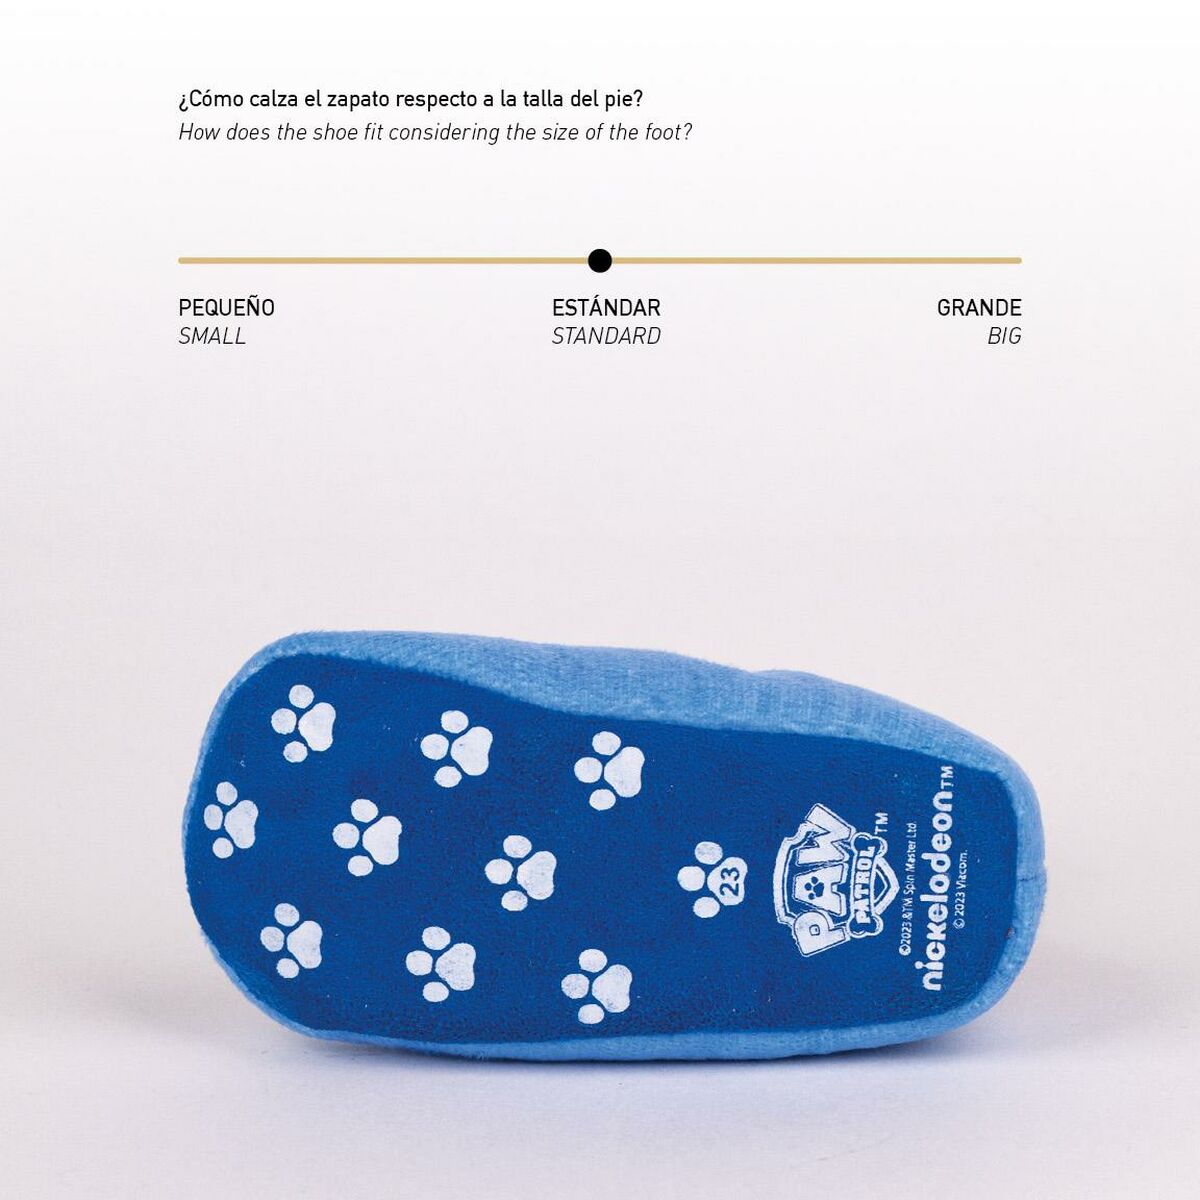 House Slippers The Paw Patrol Blue